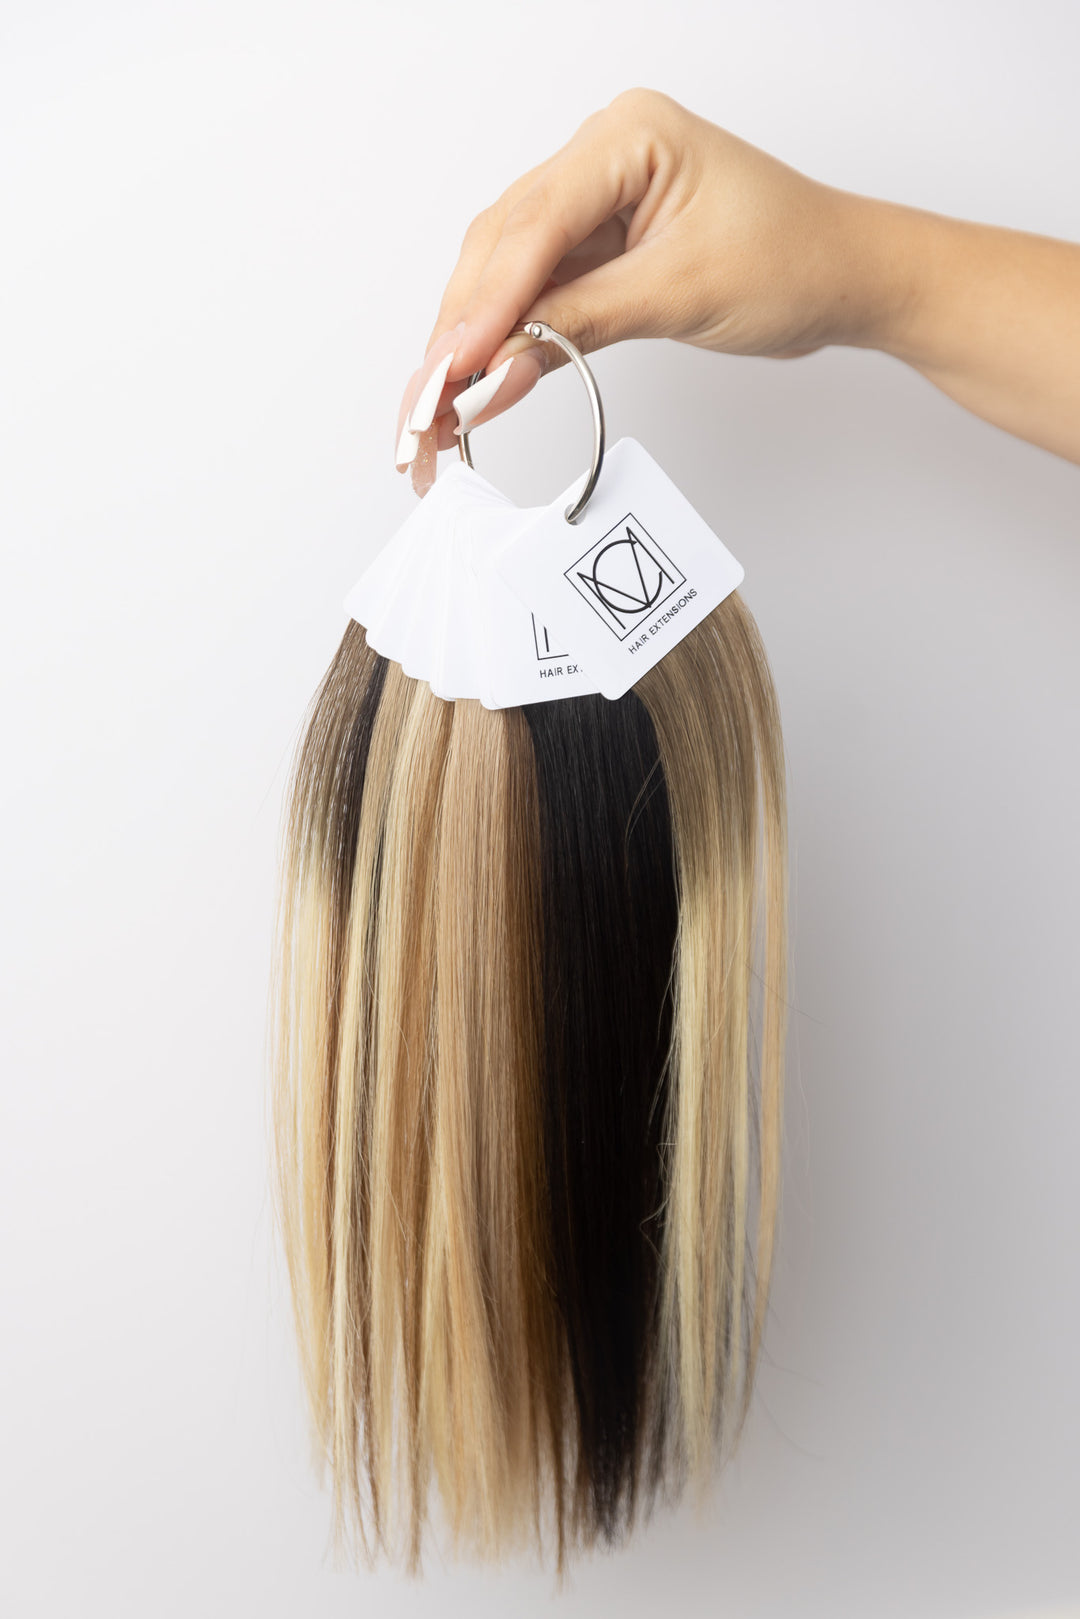 Hair Extension Swatch Ring-Christian Michael Hair Extensions